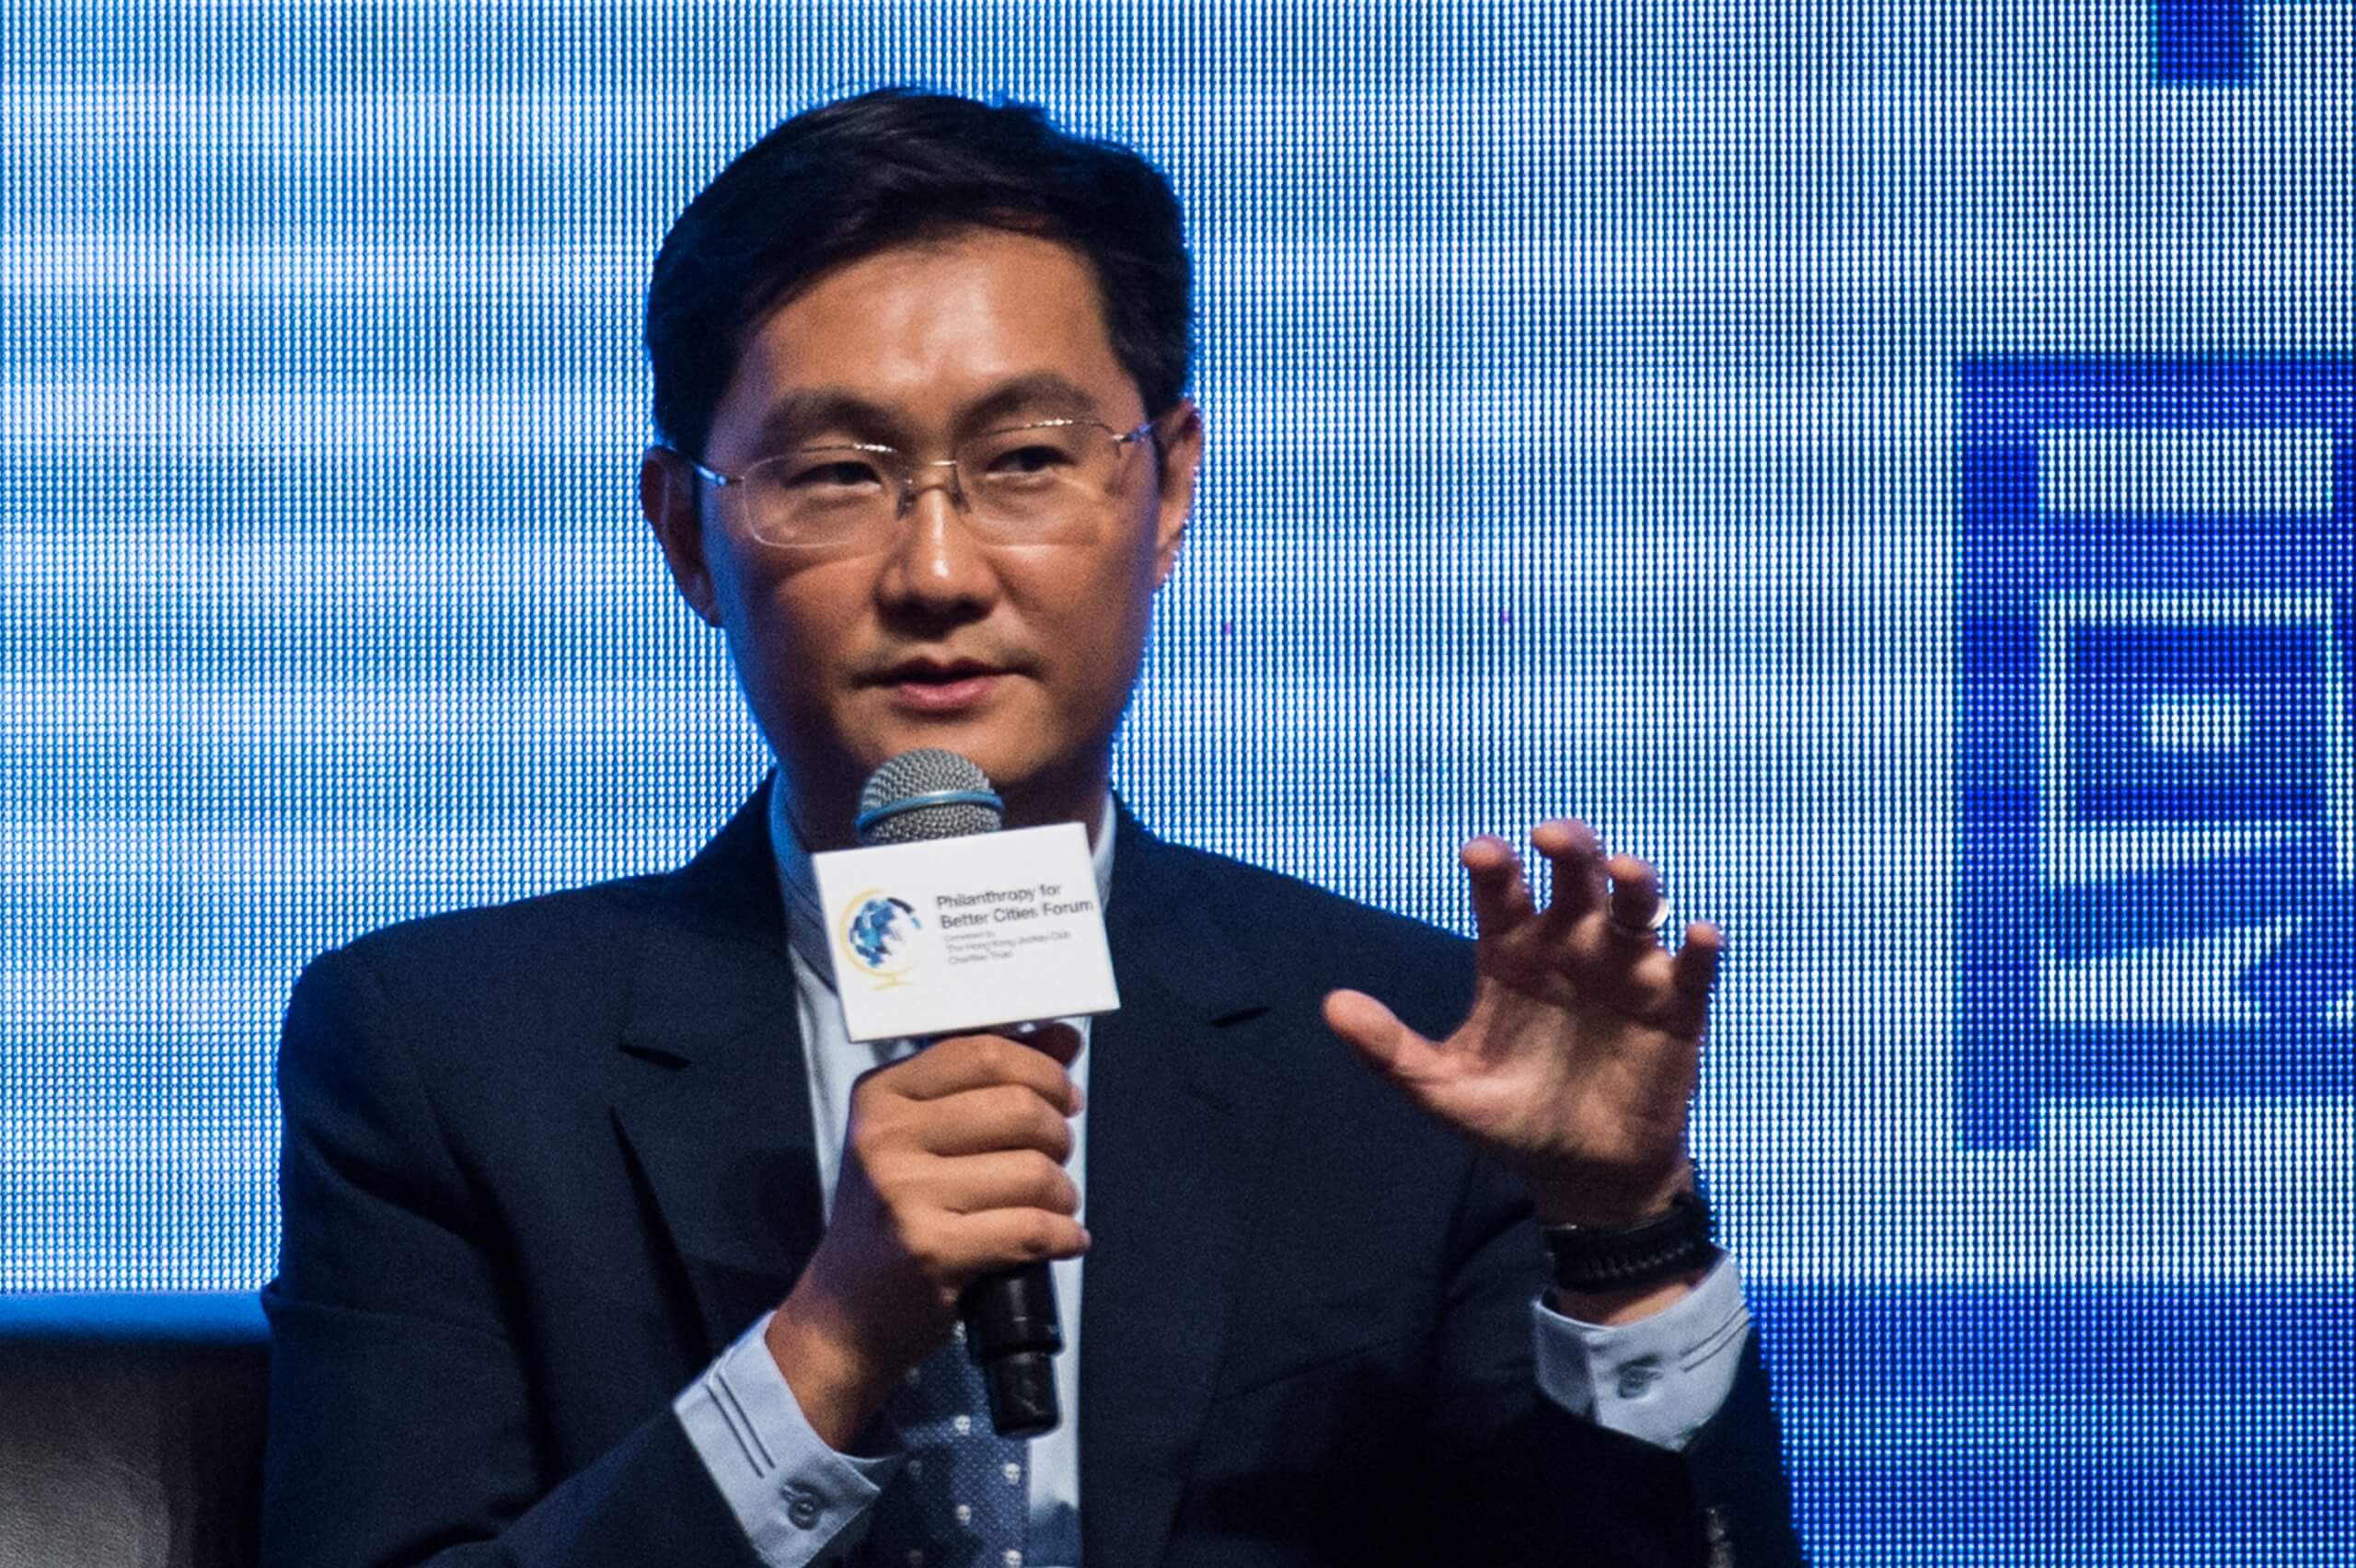 Tencent chairman and CEO Pony Ma speaks during a philanthropy forum in Hong Kong on September 23, 2016